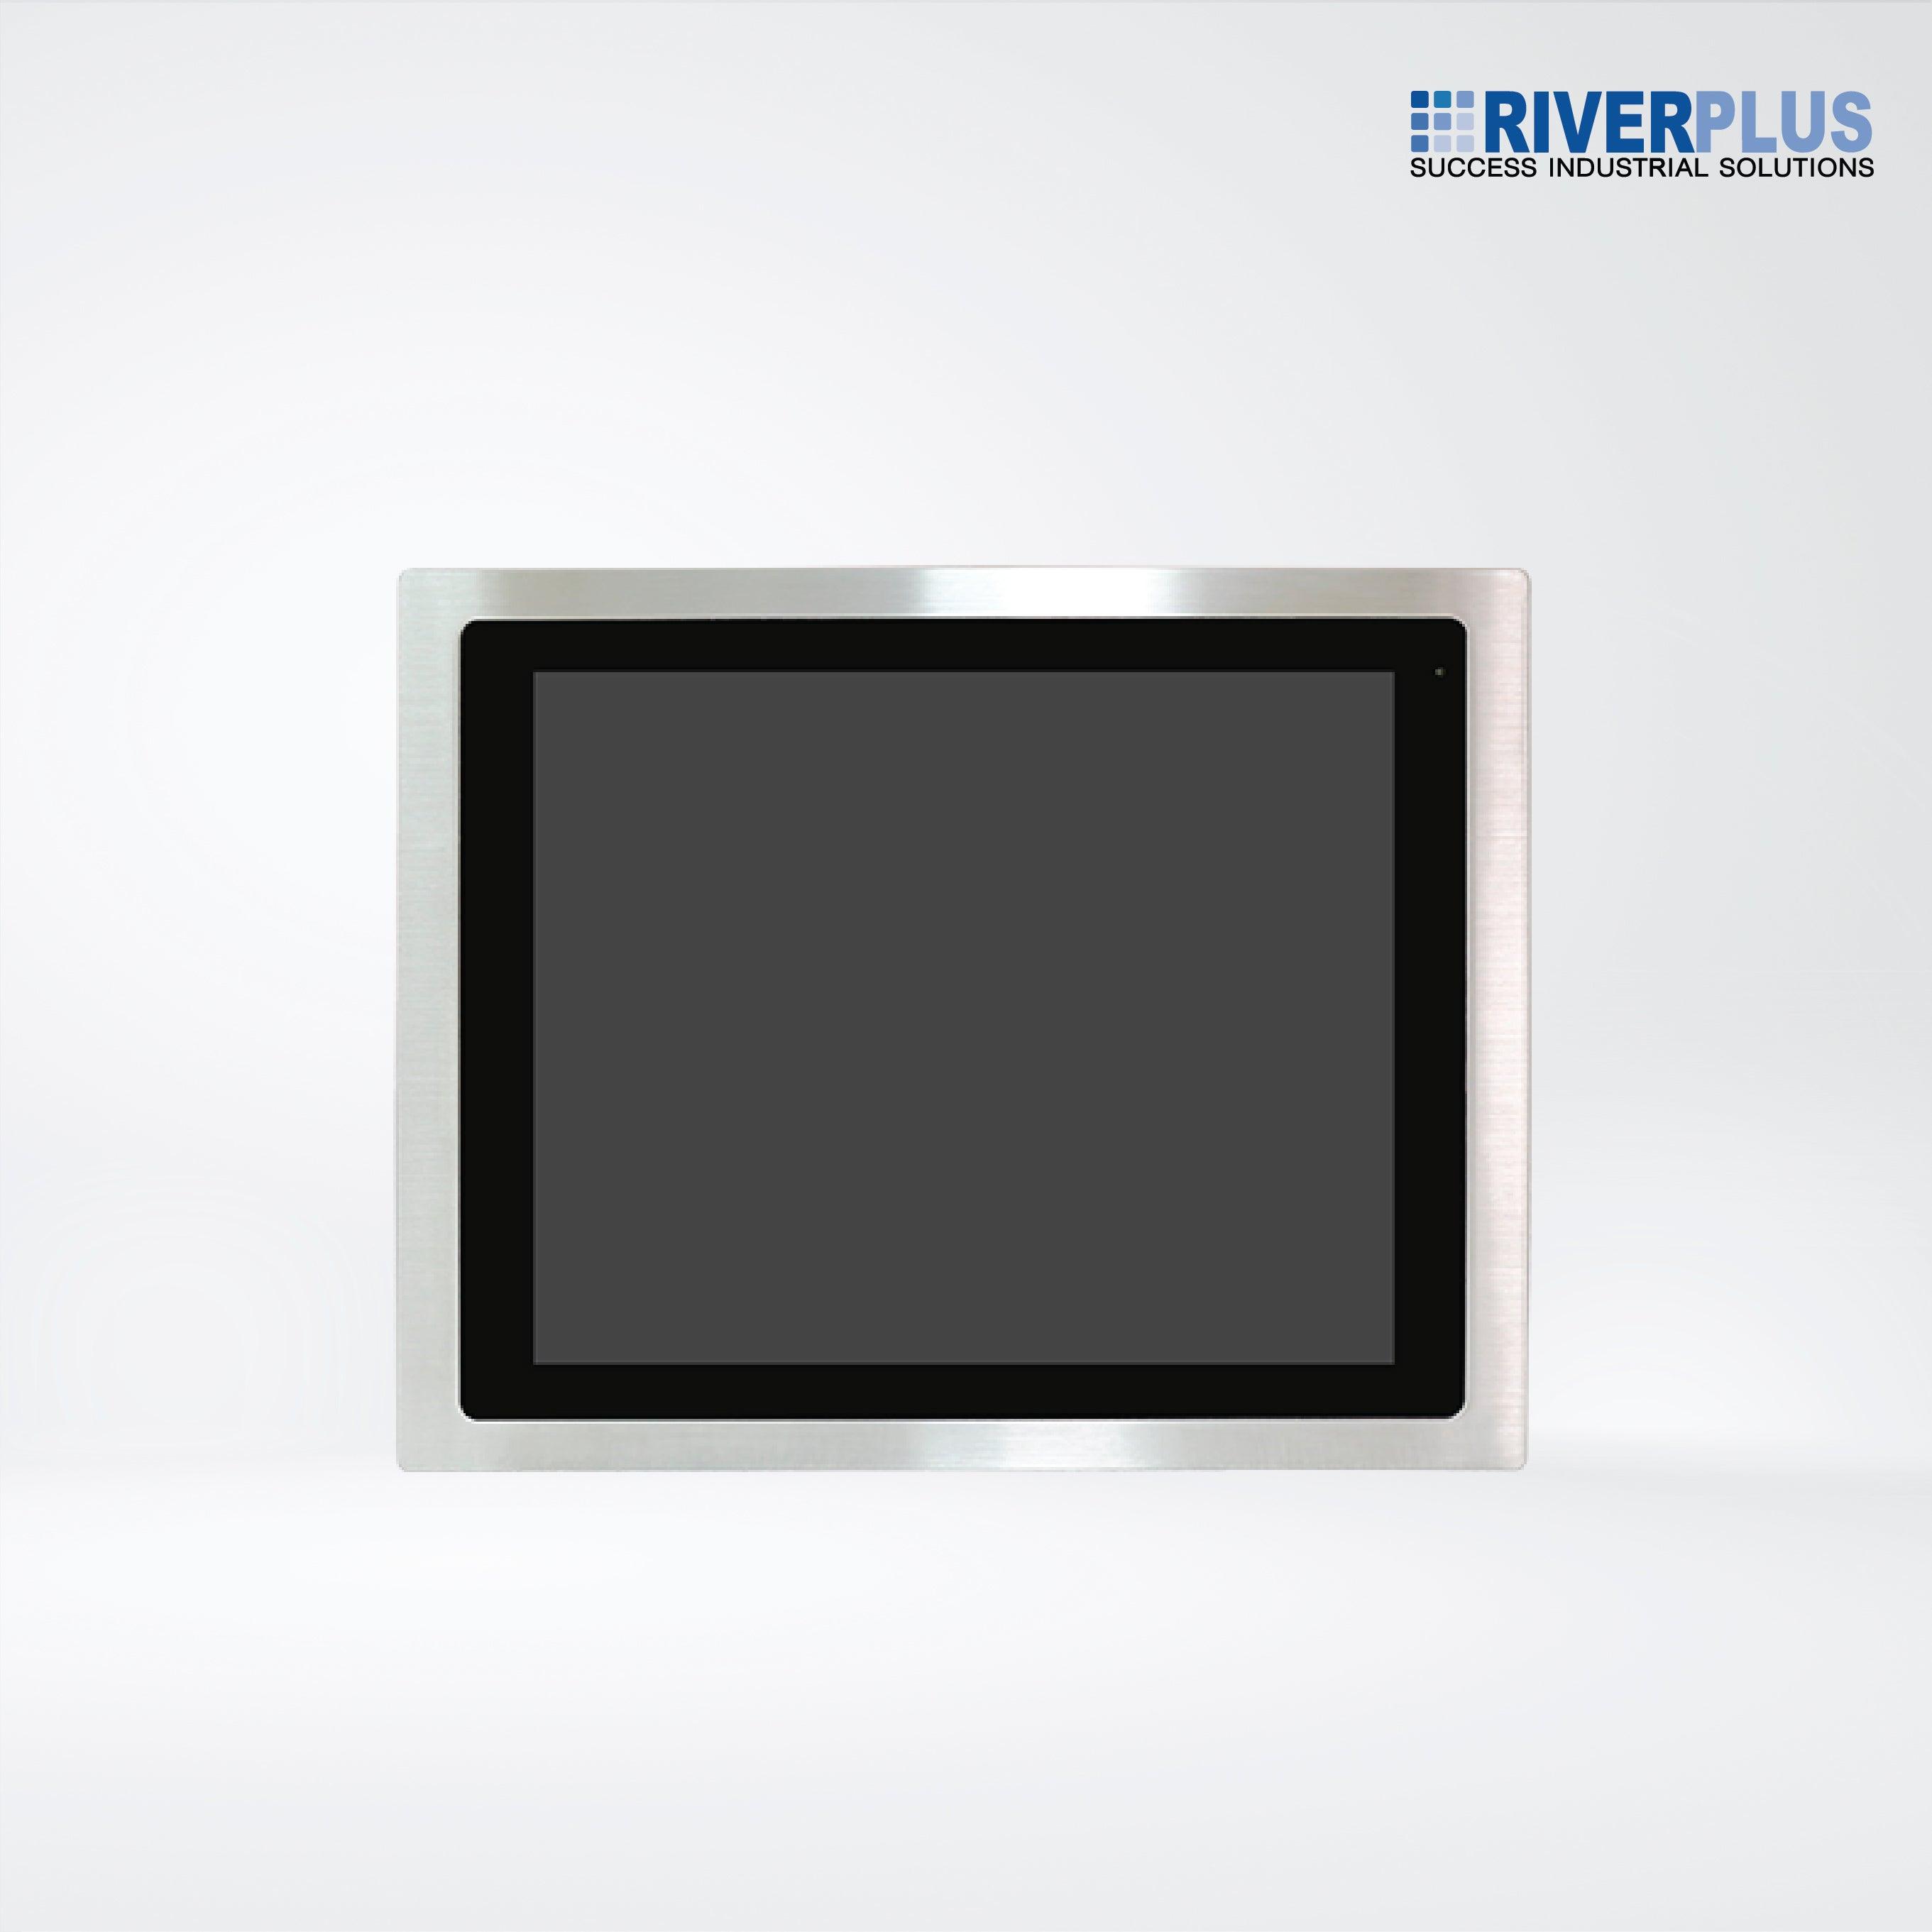 FABS-117GH 17” Flat Front Panel IP66 Stainless Chassis Display - Riverplus